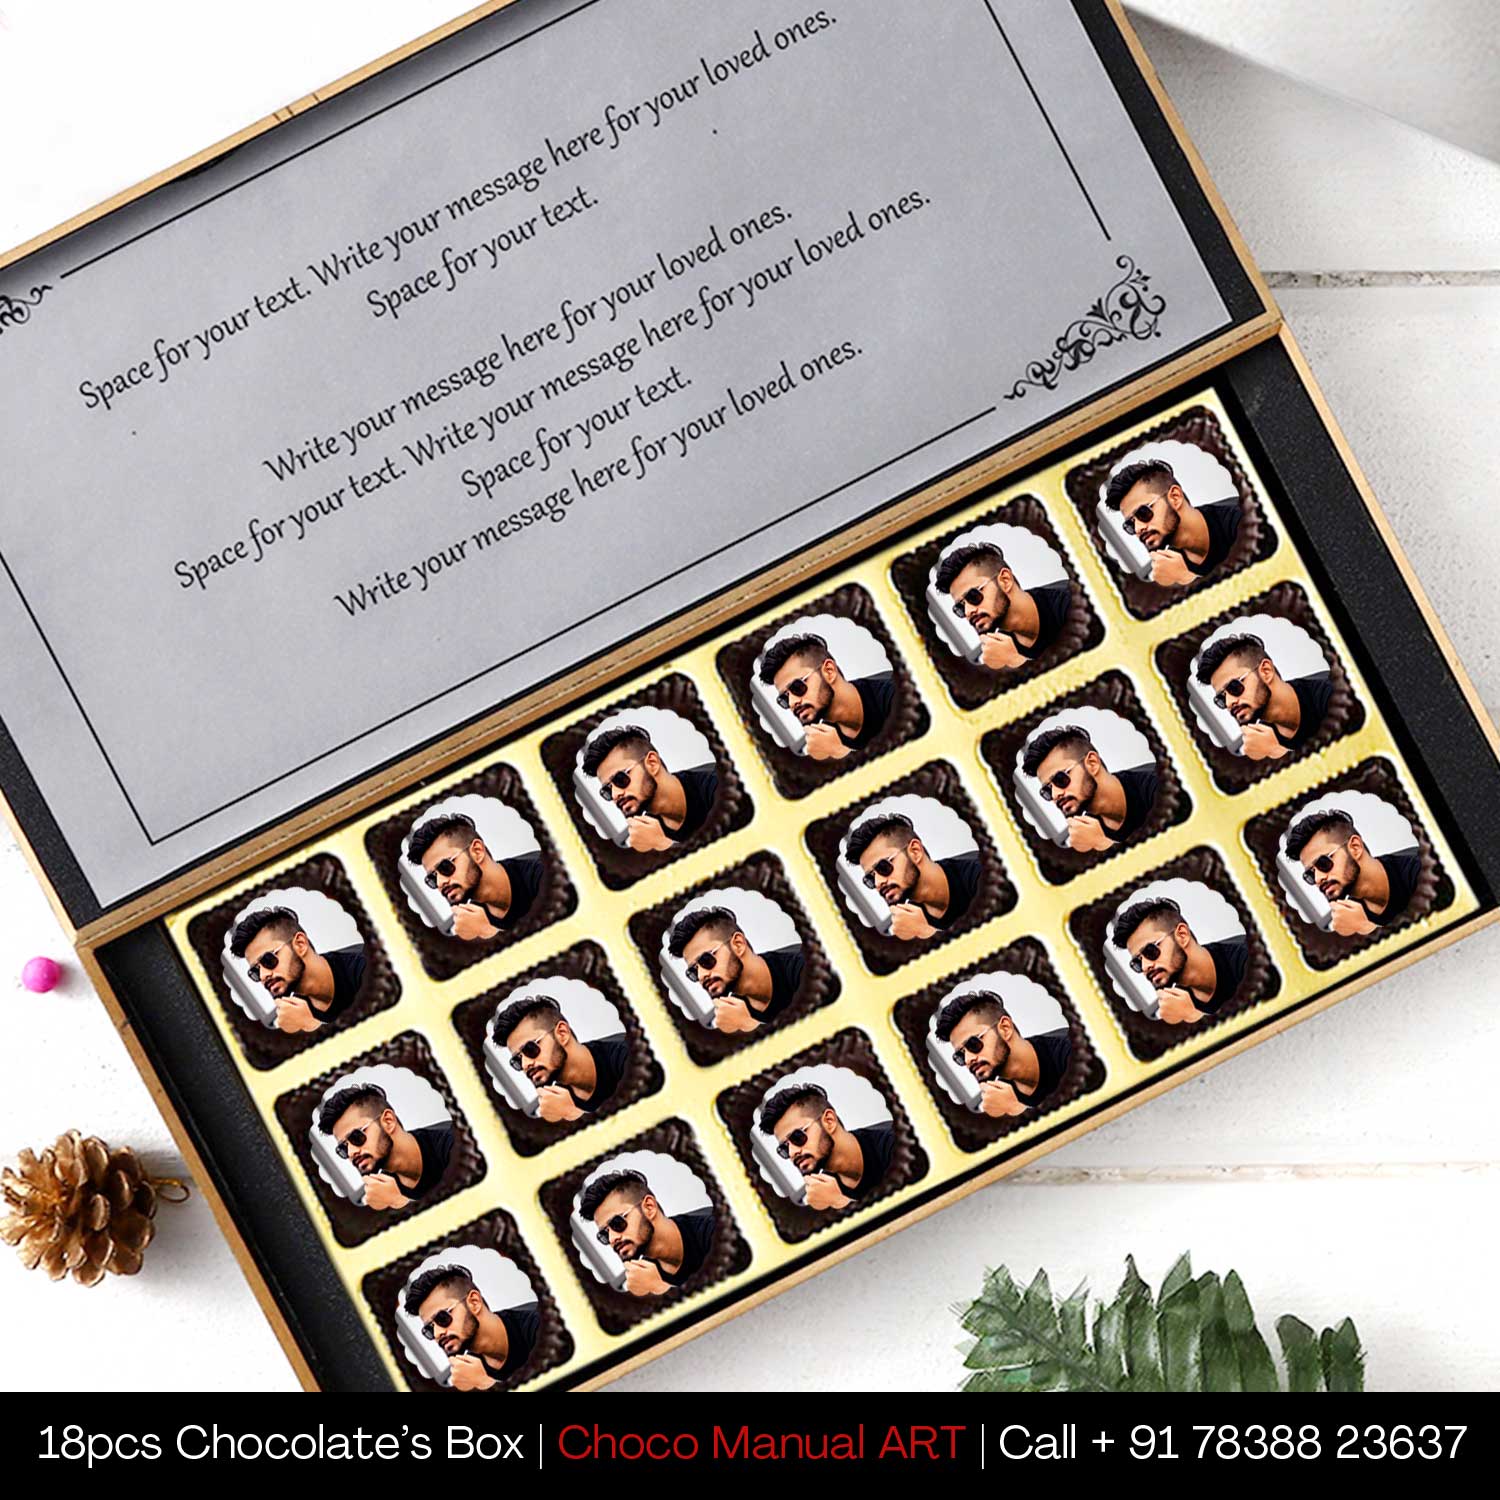  personalised chocolate gift box personalised chocolate corporate gifts personalised chocolate with photo personalised chocolate hamper personalised happy birthday chocolate personalised chocolate gifts for him custom chocolates